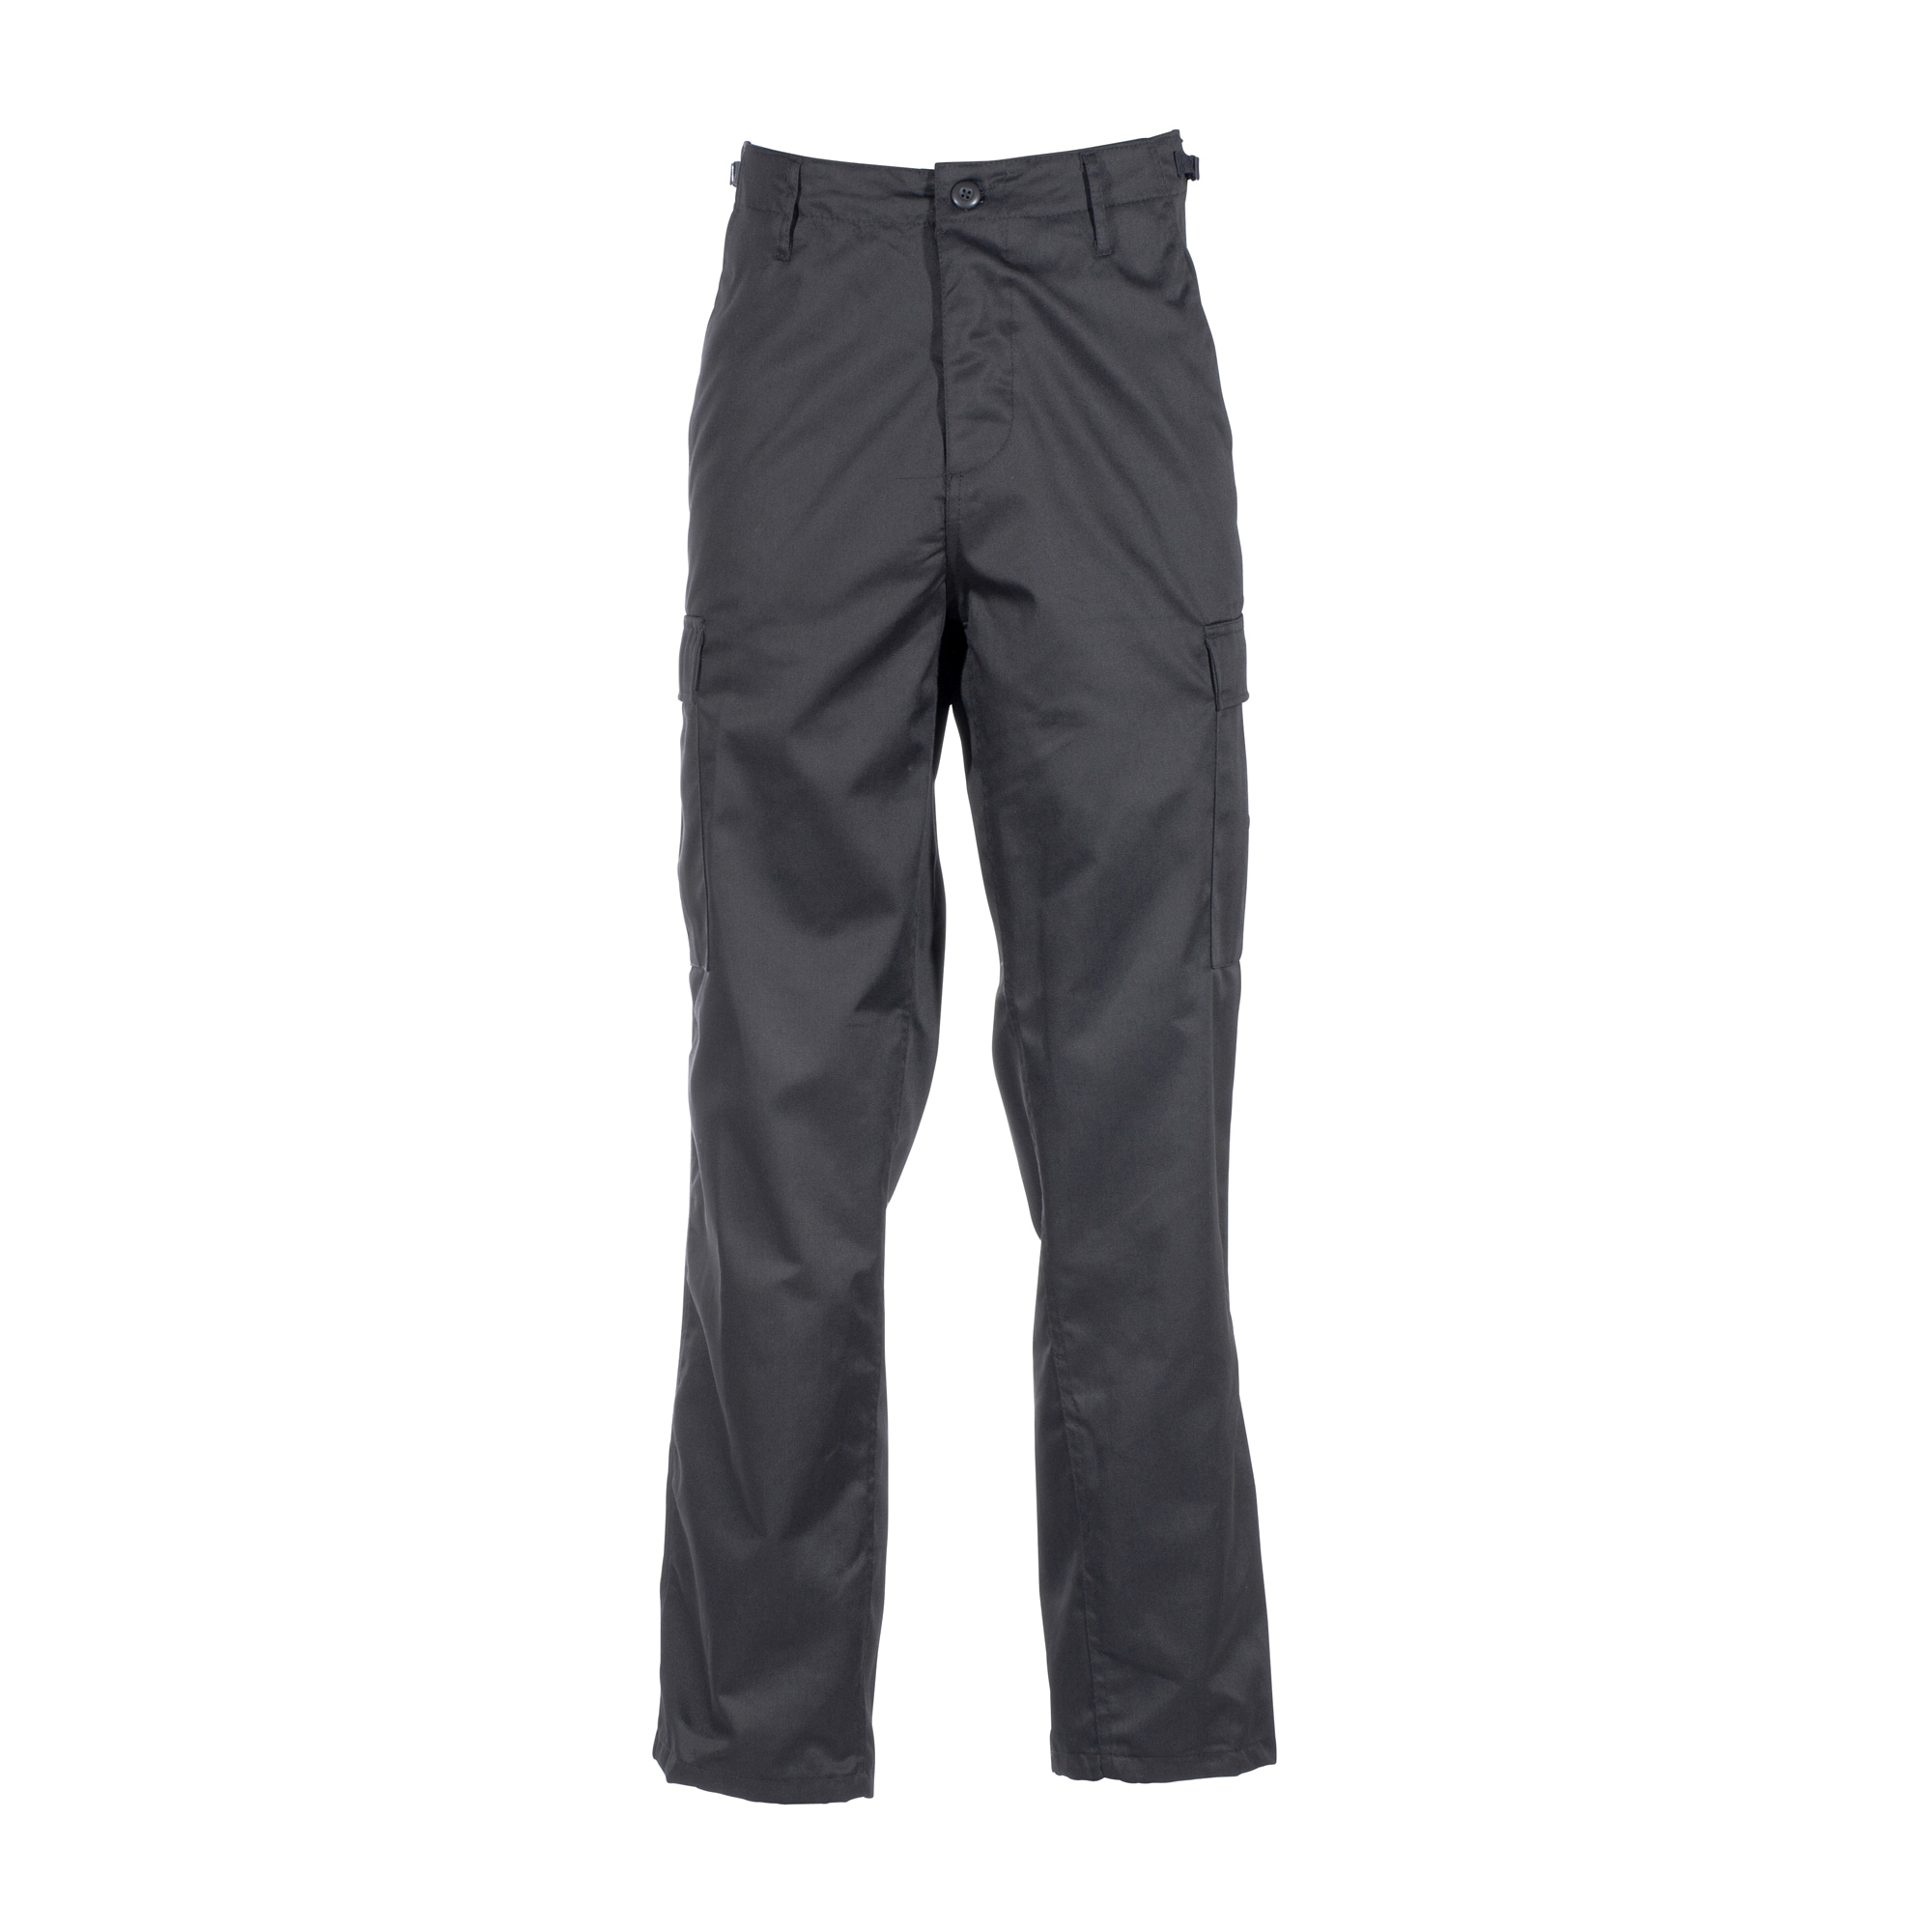 Purchase The Ranger Pants Black By Asmc